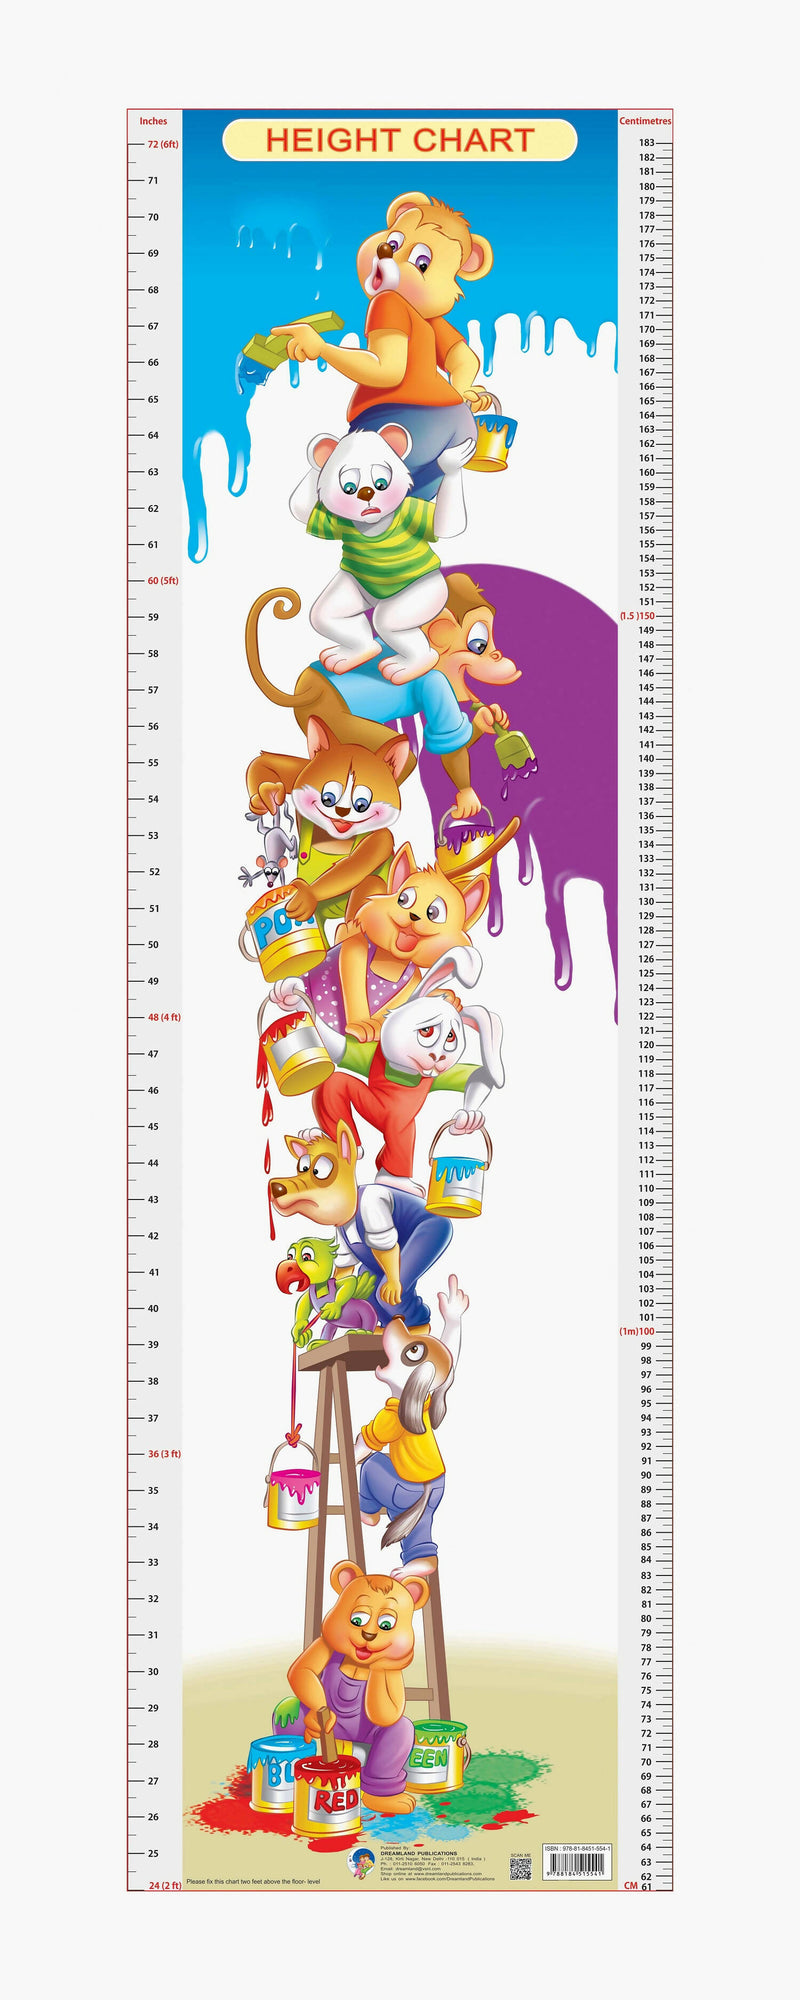 Height Chart - 4 : Reference Educational Wall Chart by Dreamland Publications